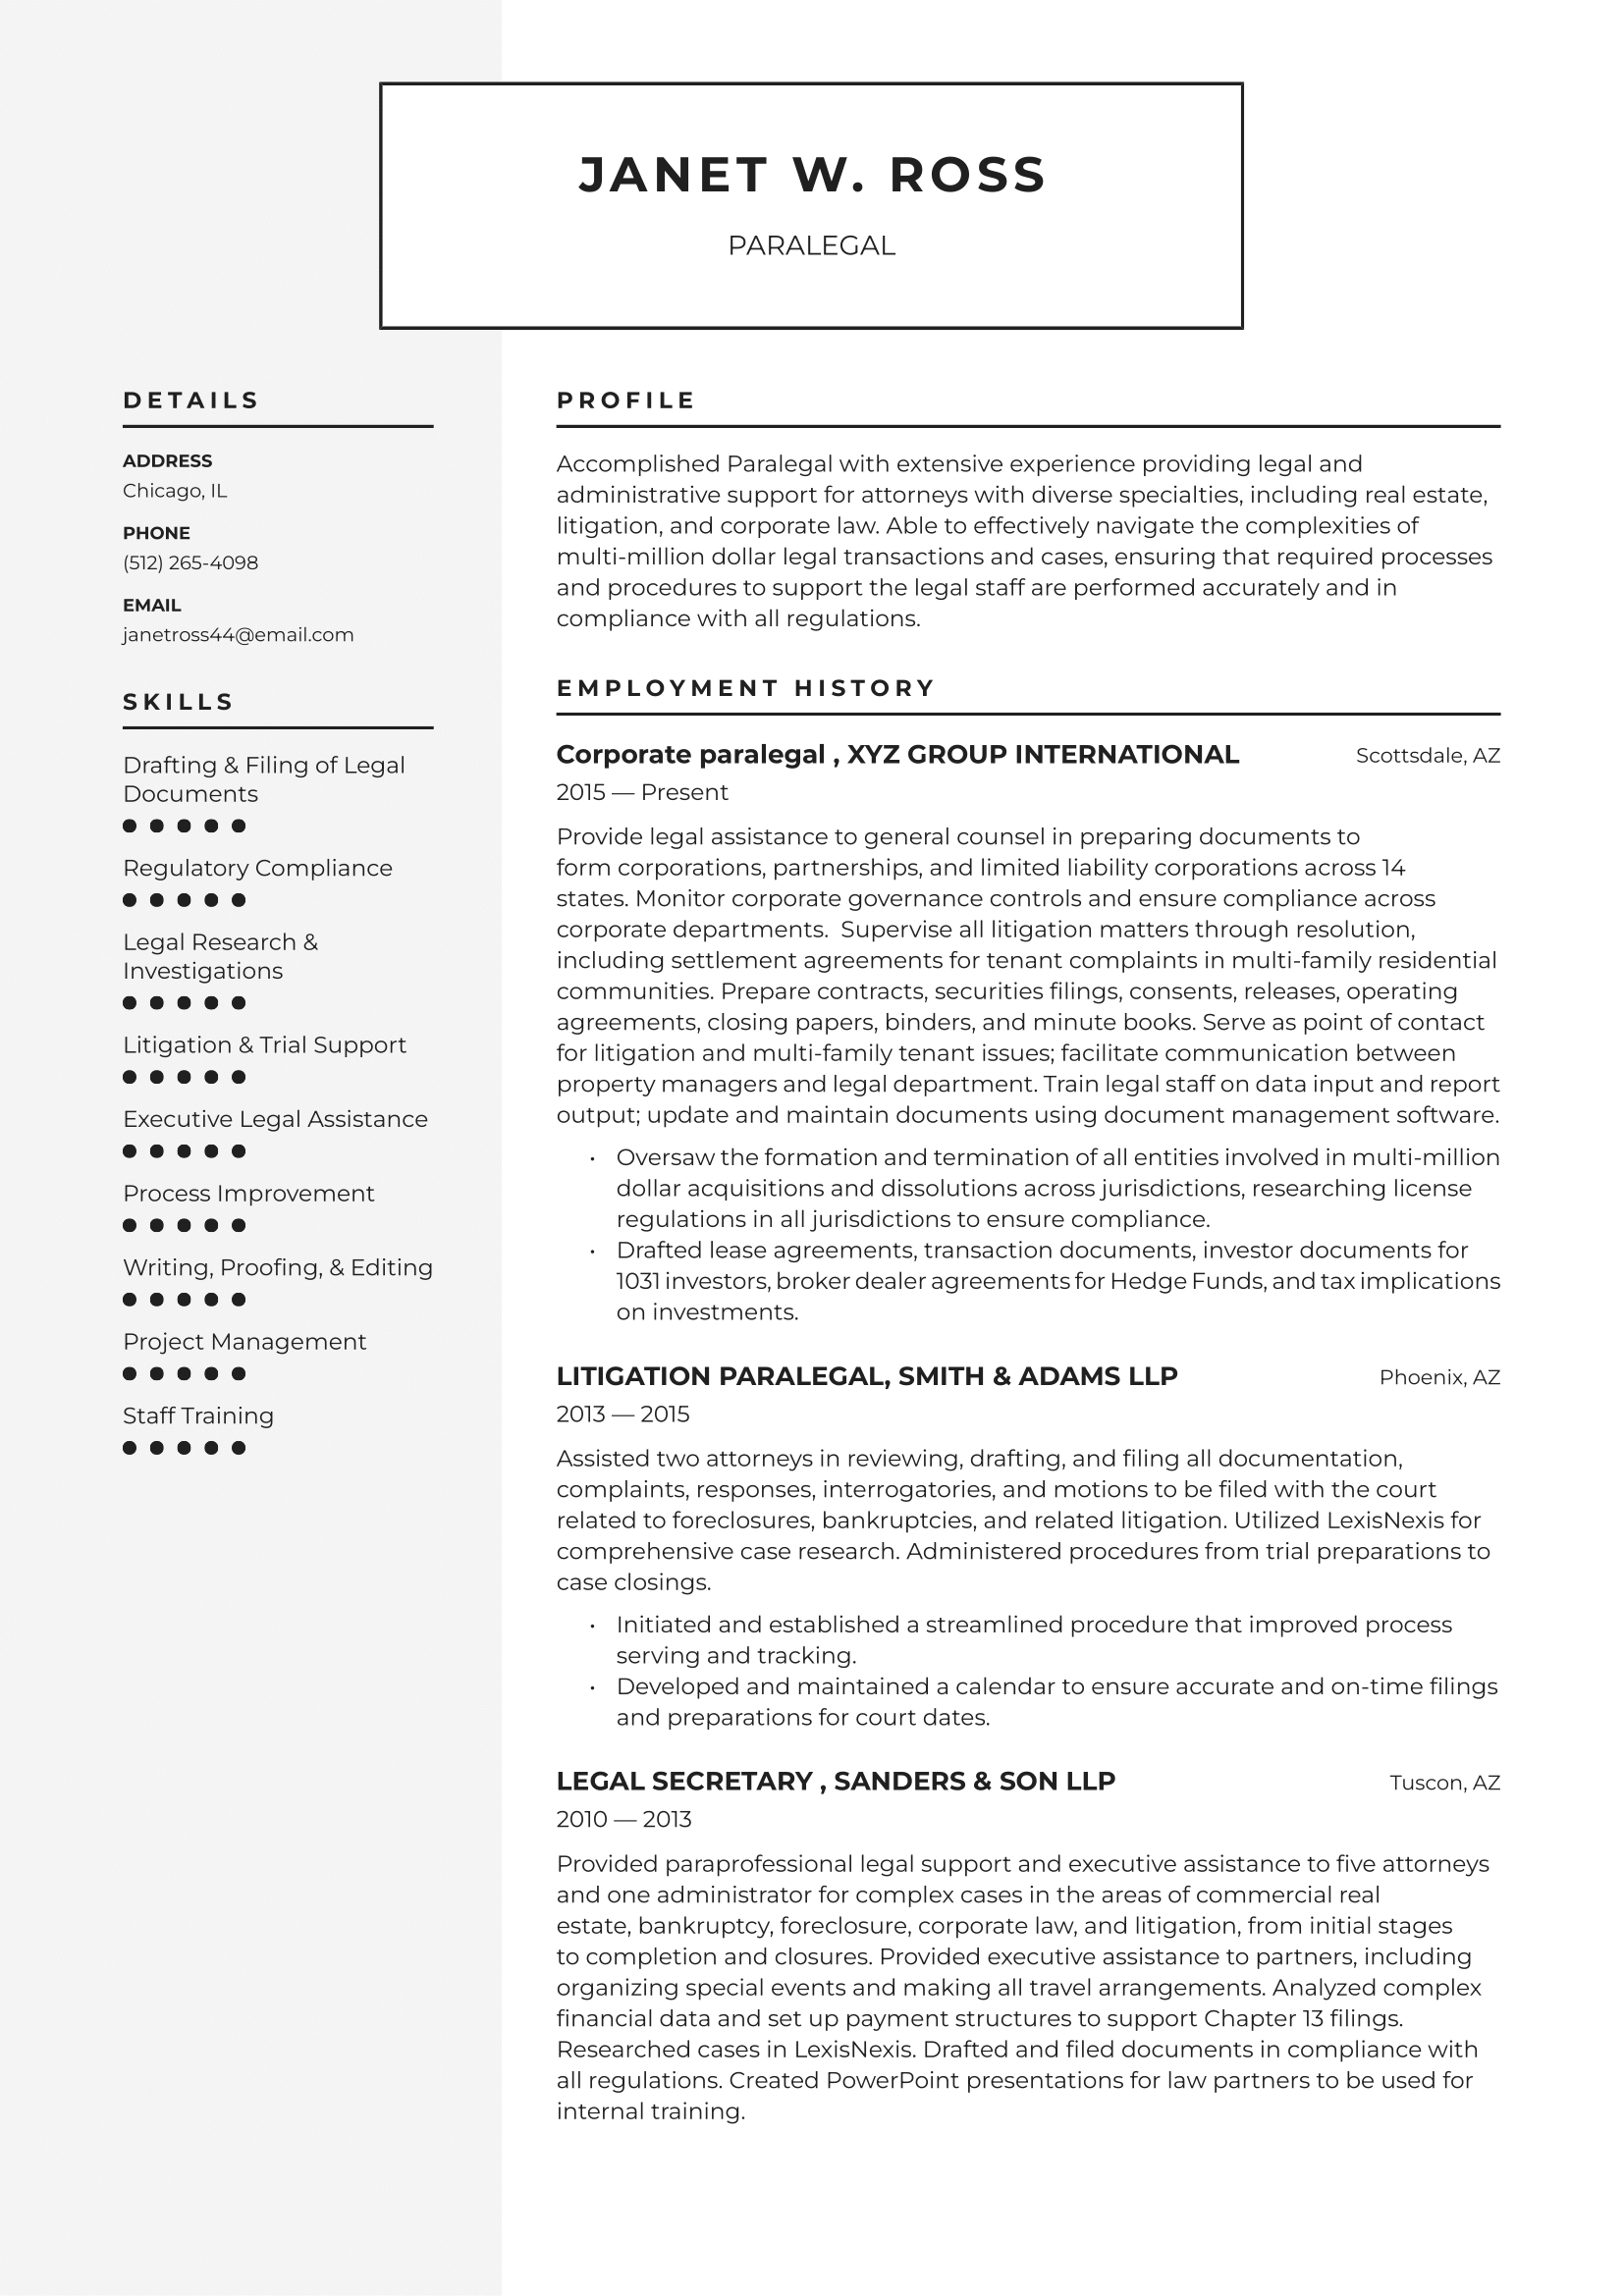 Paralegal Resume Example & Writing Guide